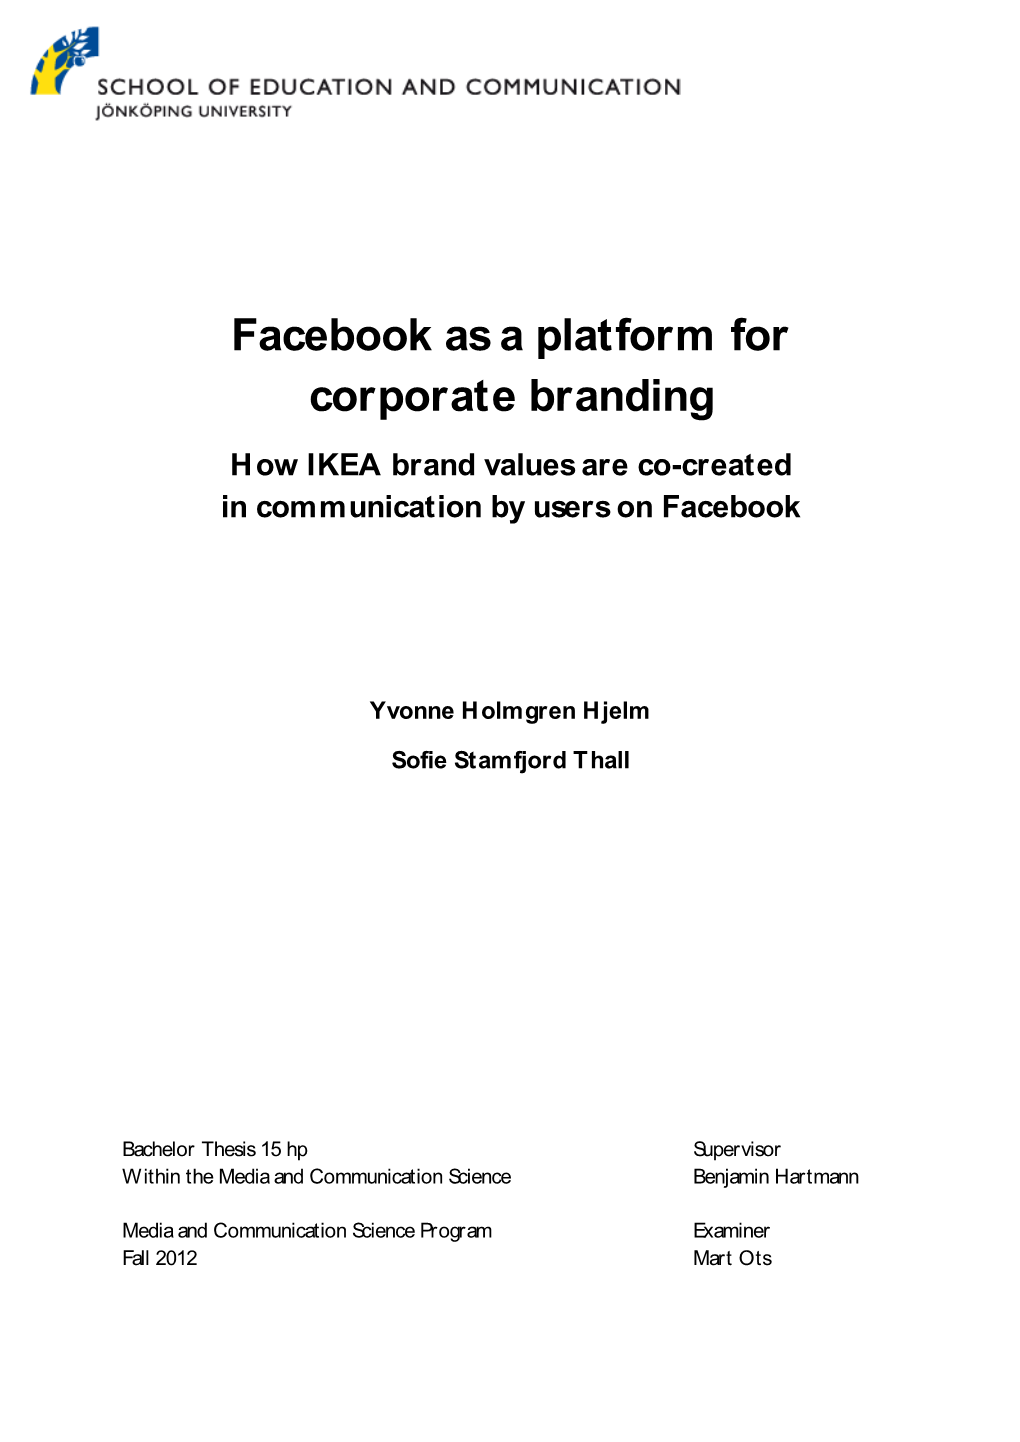 Facebook As a Platform for Corporate Branding How IKEA Brand Values Are Co-Created in Communication by Users on Facebook